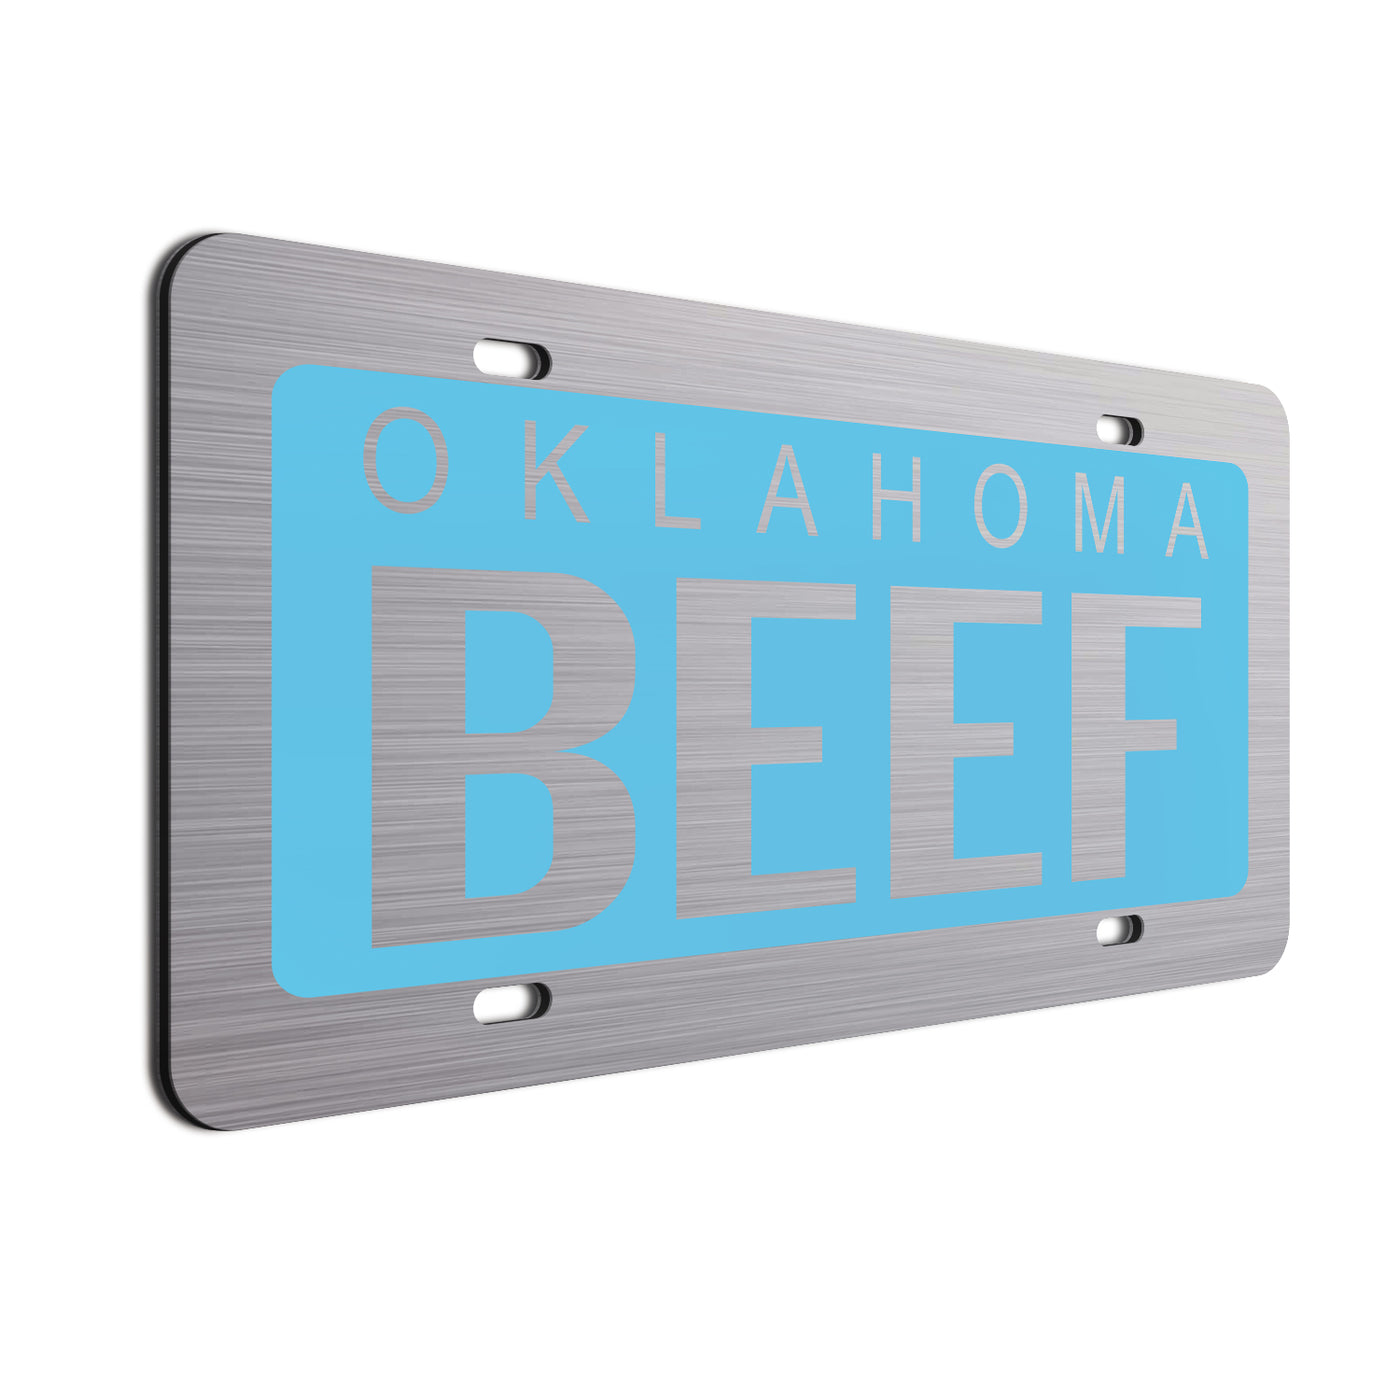  Oklahoma Beef Car License Plate Baby Blue